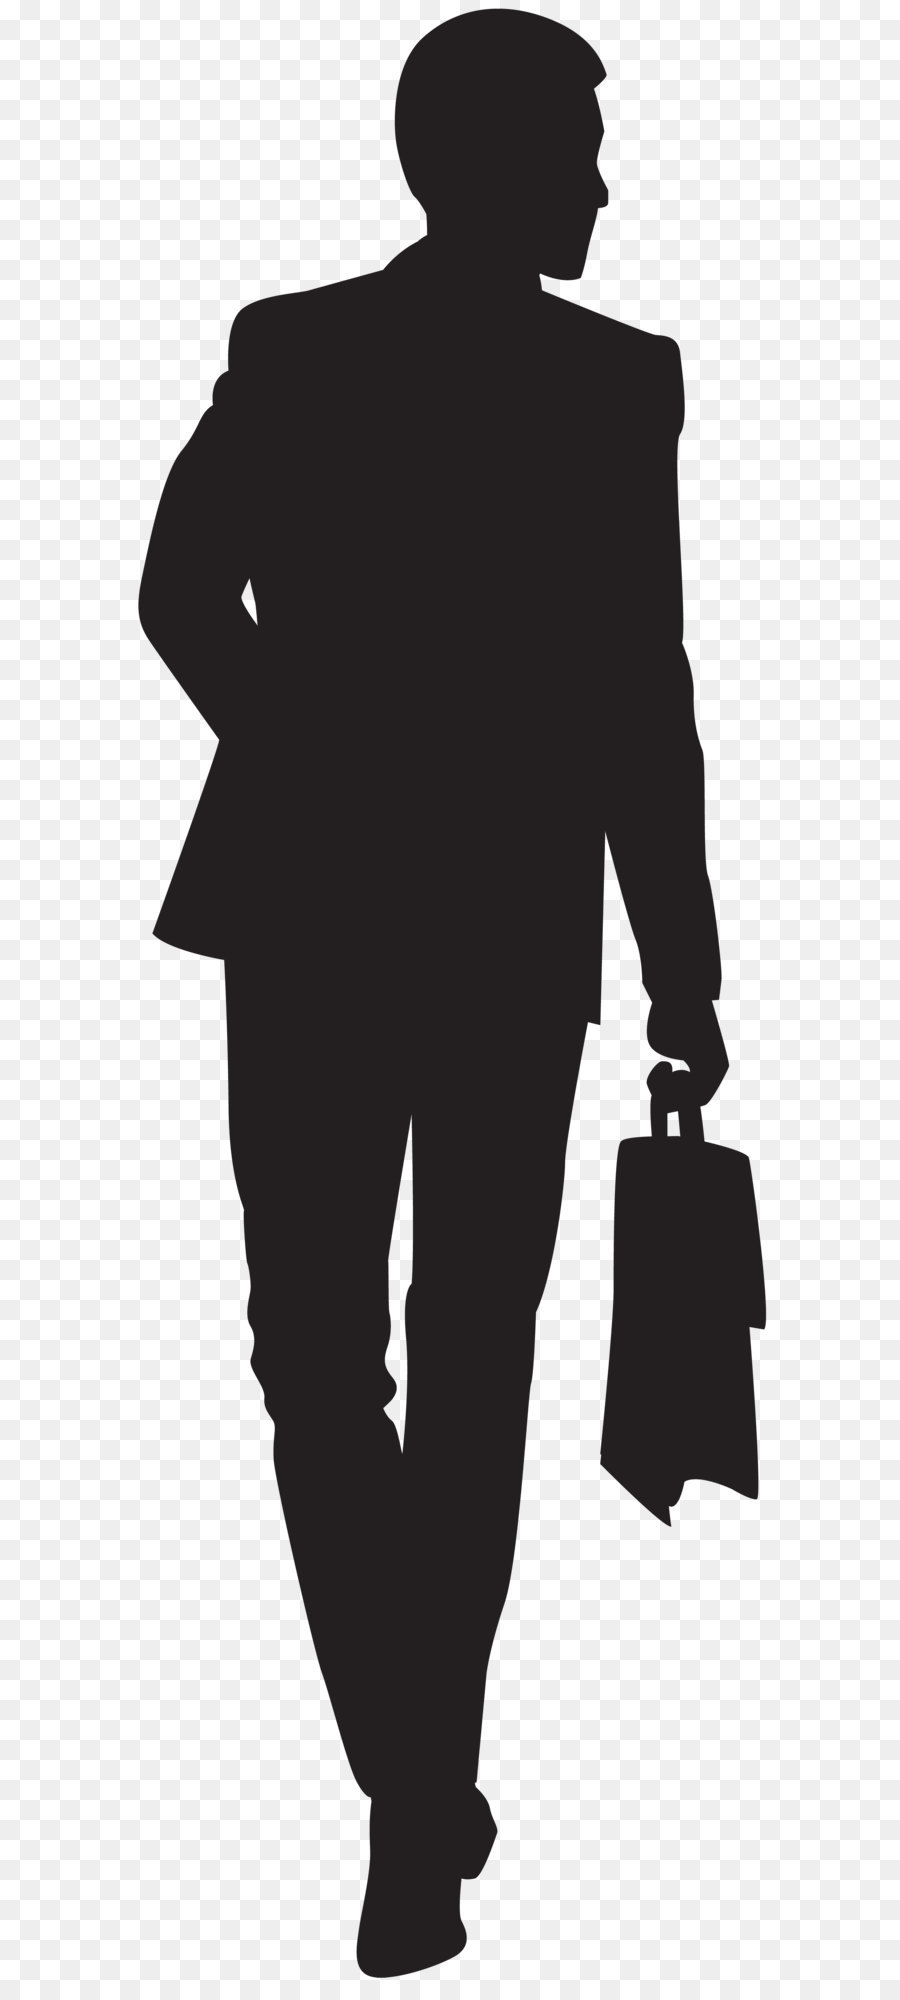 Silhouette Clip art - Businessman Silhouette PNG Clip Art png download - 2624*8000 - Free Transparent Silhouette png Download.